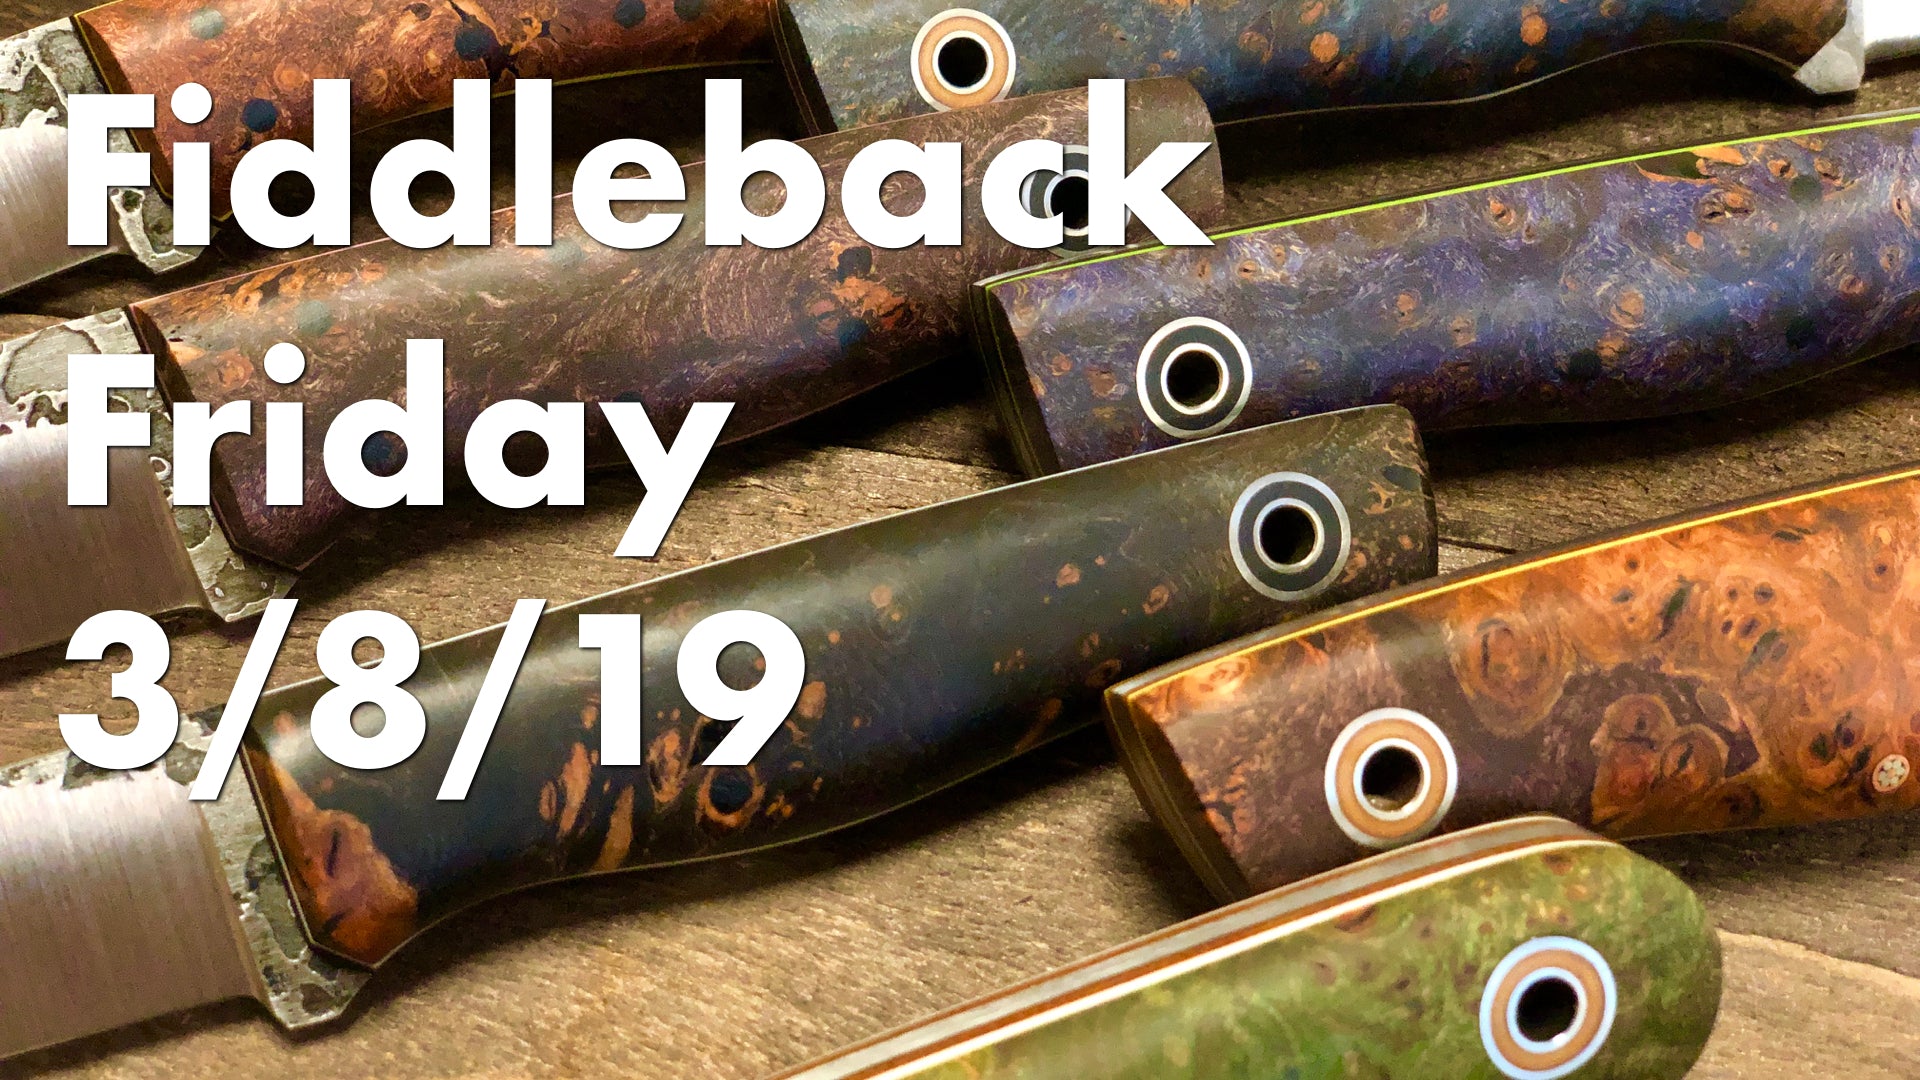 Fiddleback Friday 3/8/19 - Video Overview